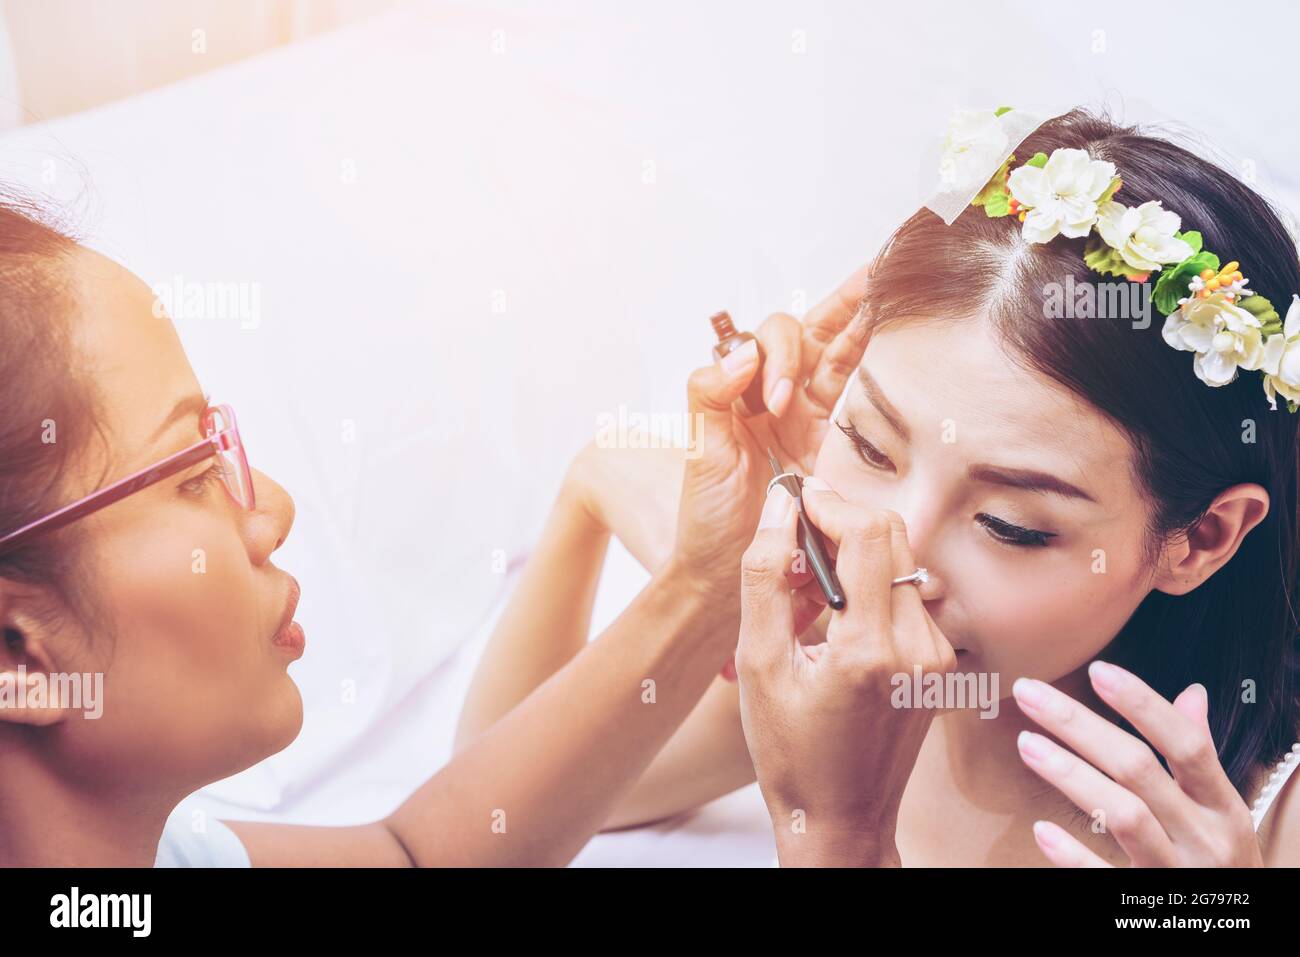 The bride is making up by beautician.Happy wedding day. Stock Photo